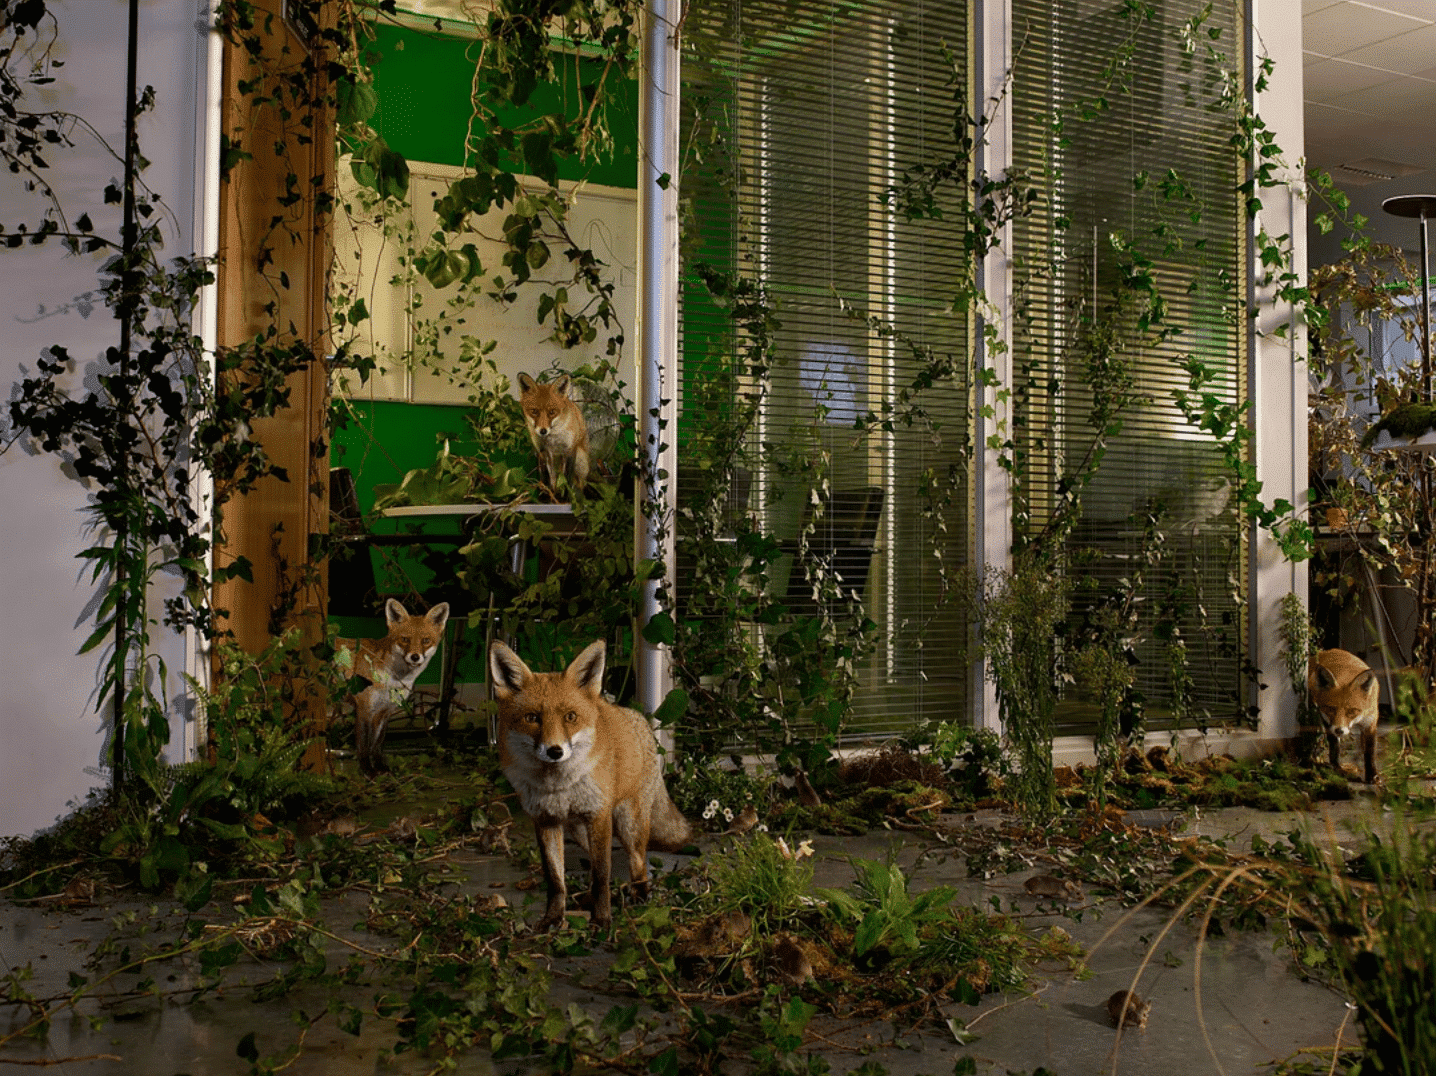 A group of foxes inside a building overrun with plants